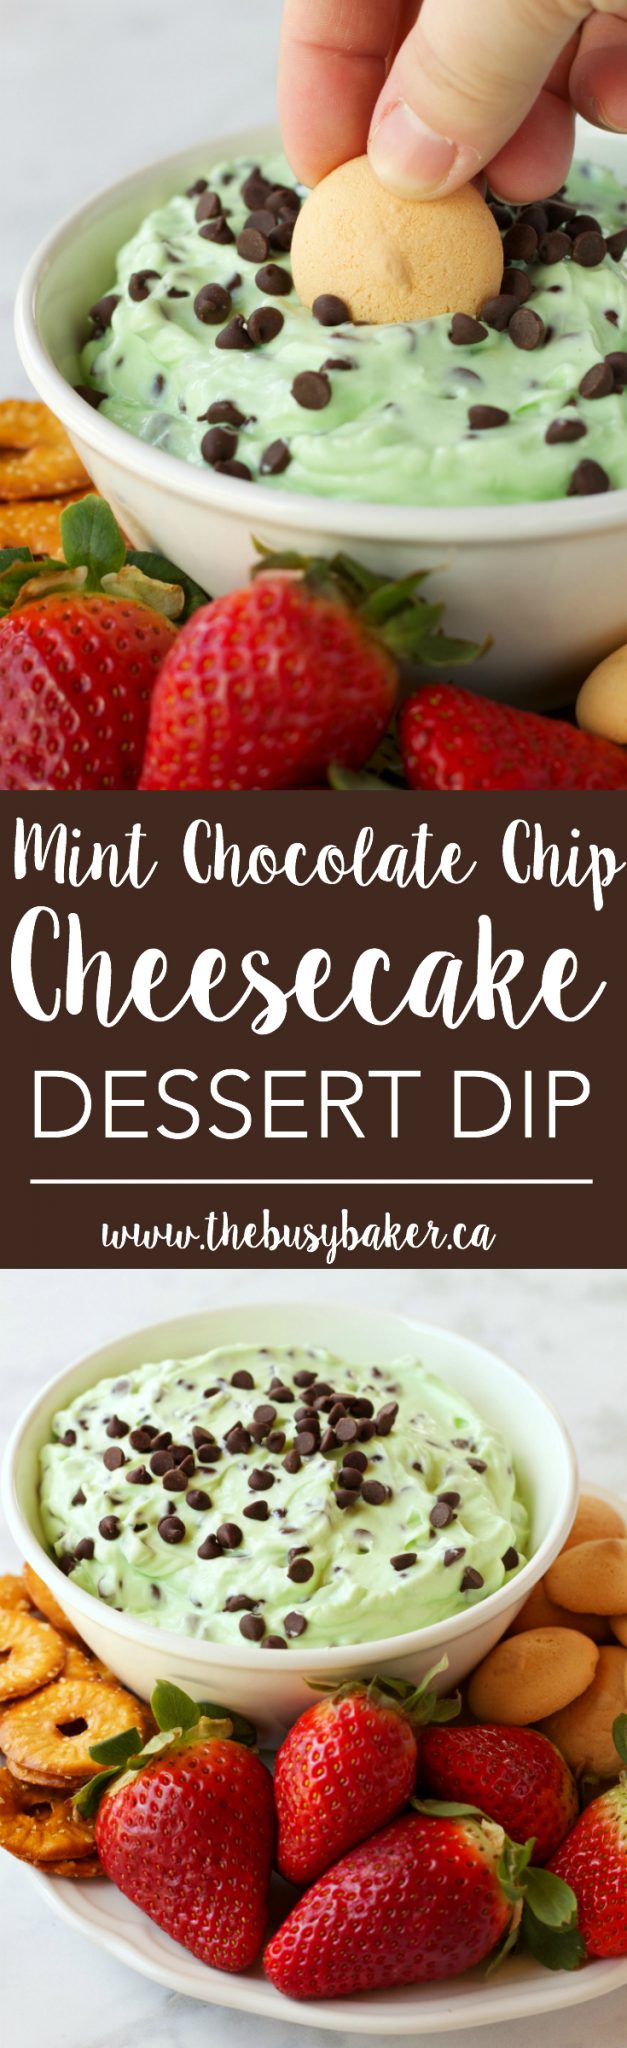 This Mint Chocolate Chip Cheesecake Dessert Dip is a perfect easy to make, healthier sweet treat for St. Patrick's Day, or any time of the year! Recipe from thebusybaker.ca!